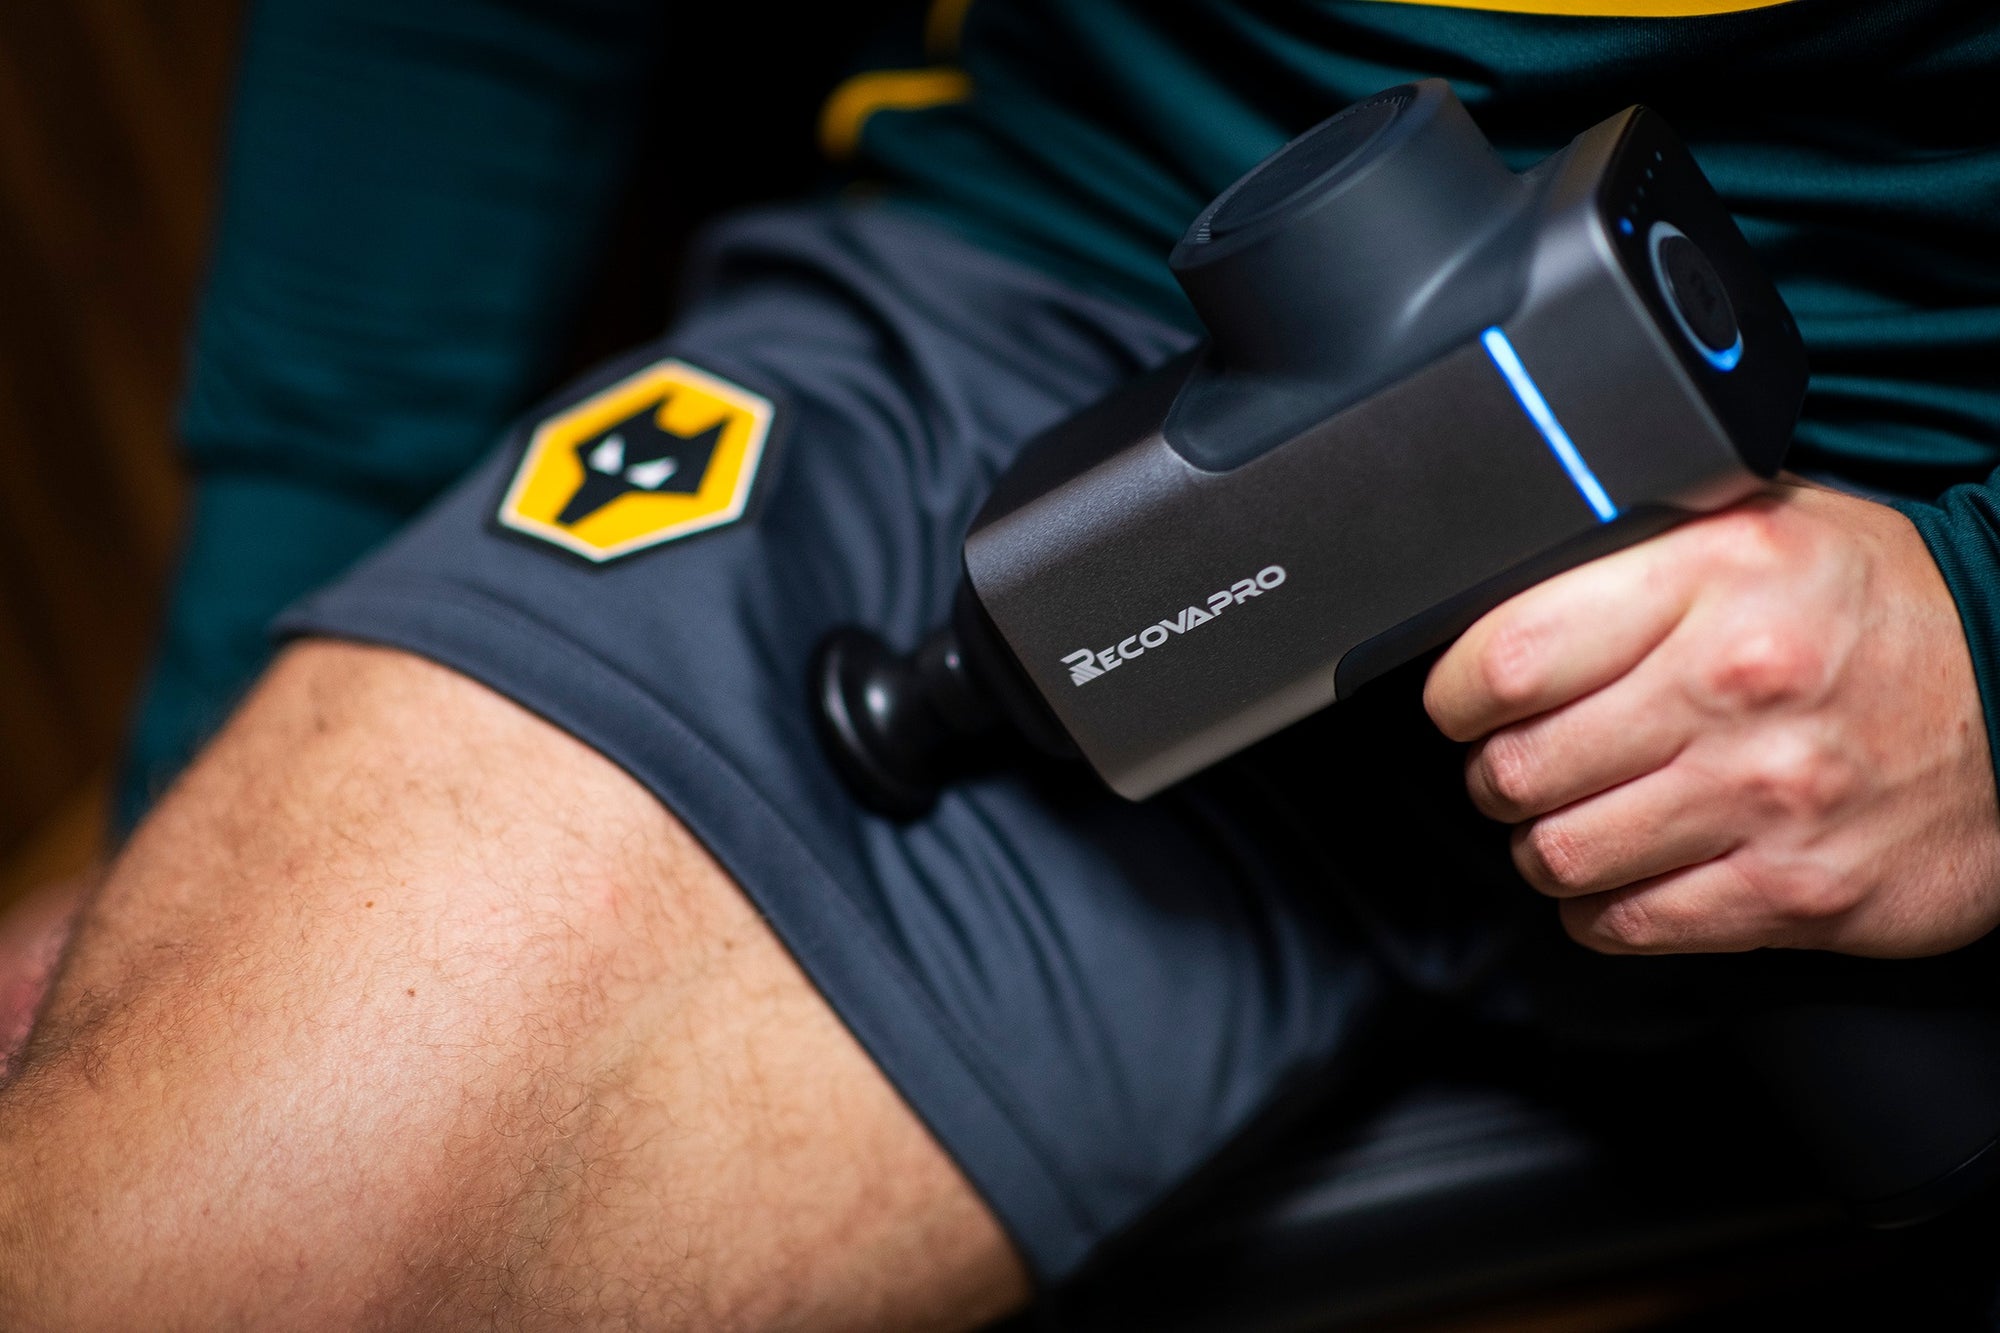 HOW TO USE THE RECOVAPRO MASSAGE GUNS TO ALLEVIATE SORENESS